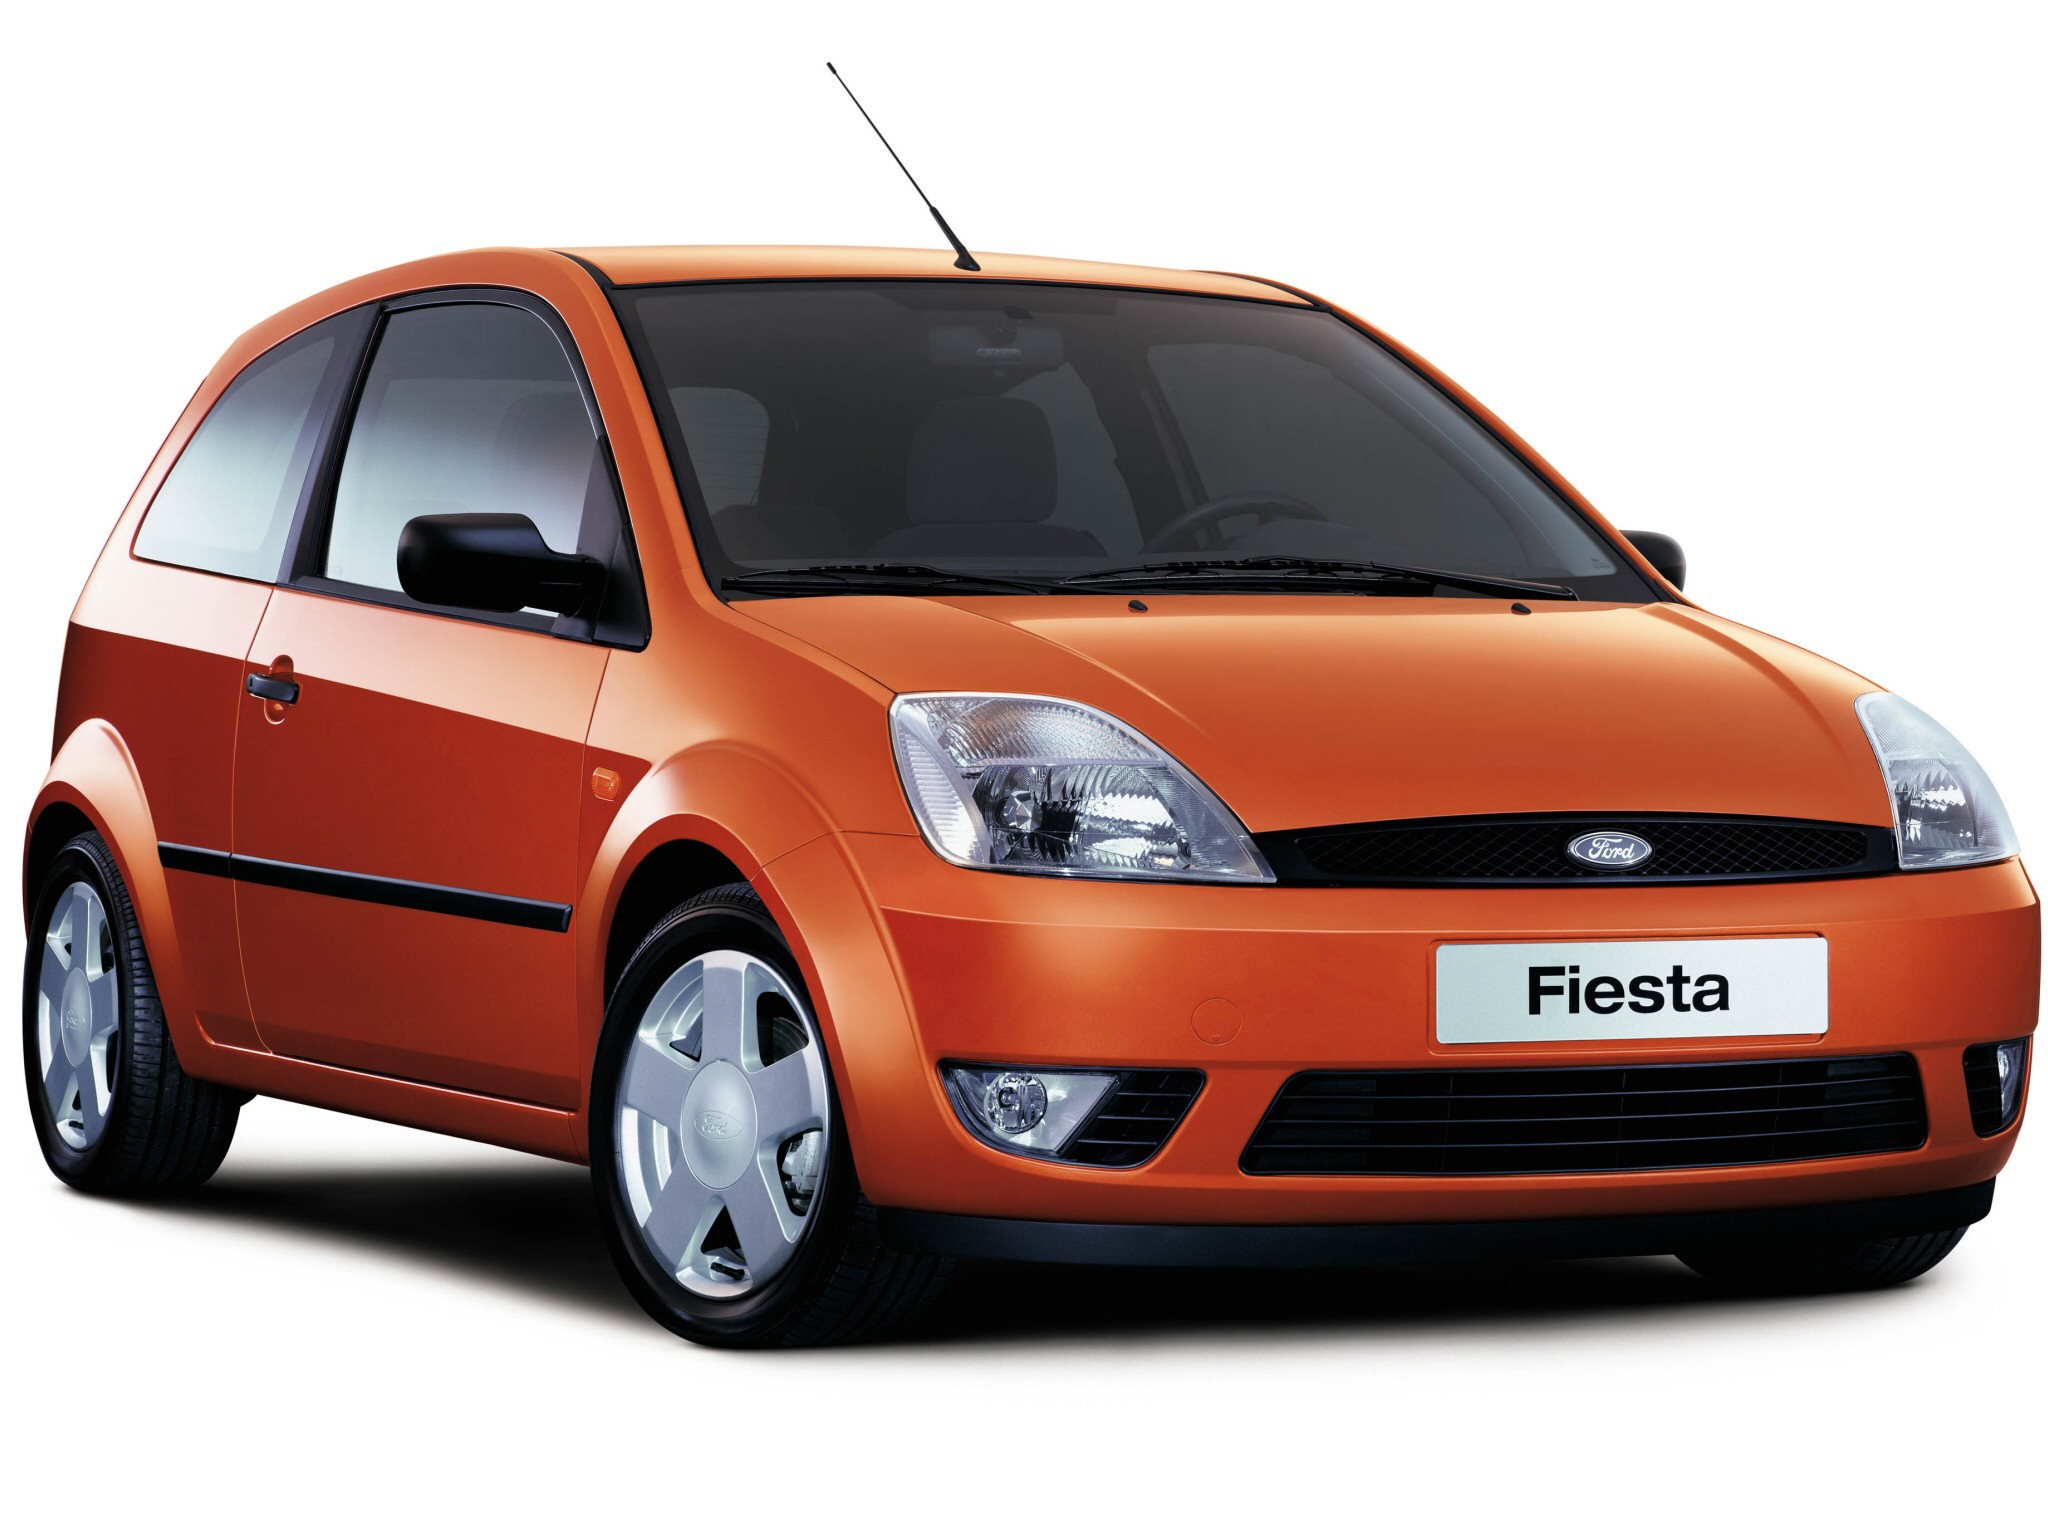 Car in pictures car photo gallery » Ford Fiesta 2002